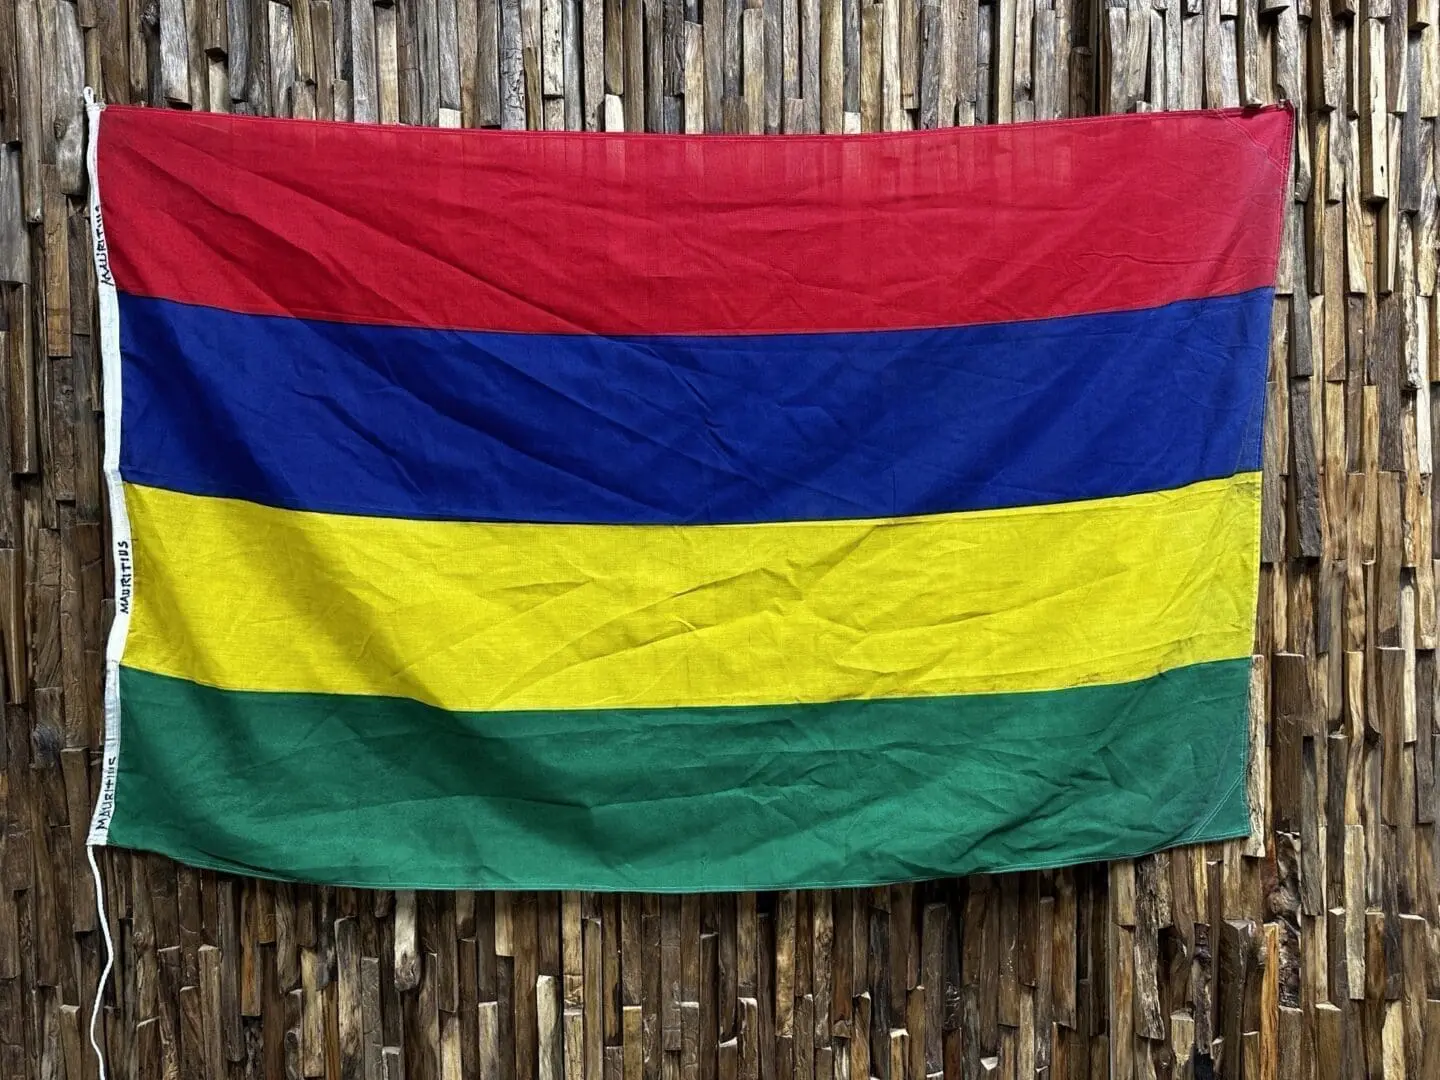 A colorful flag hanging on the side of a wooden fence.